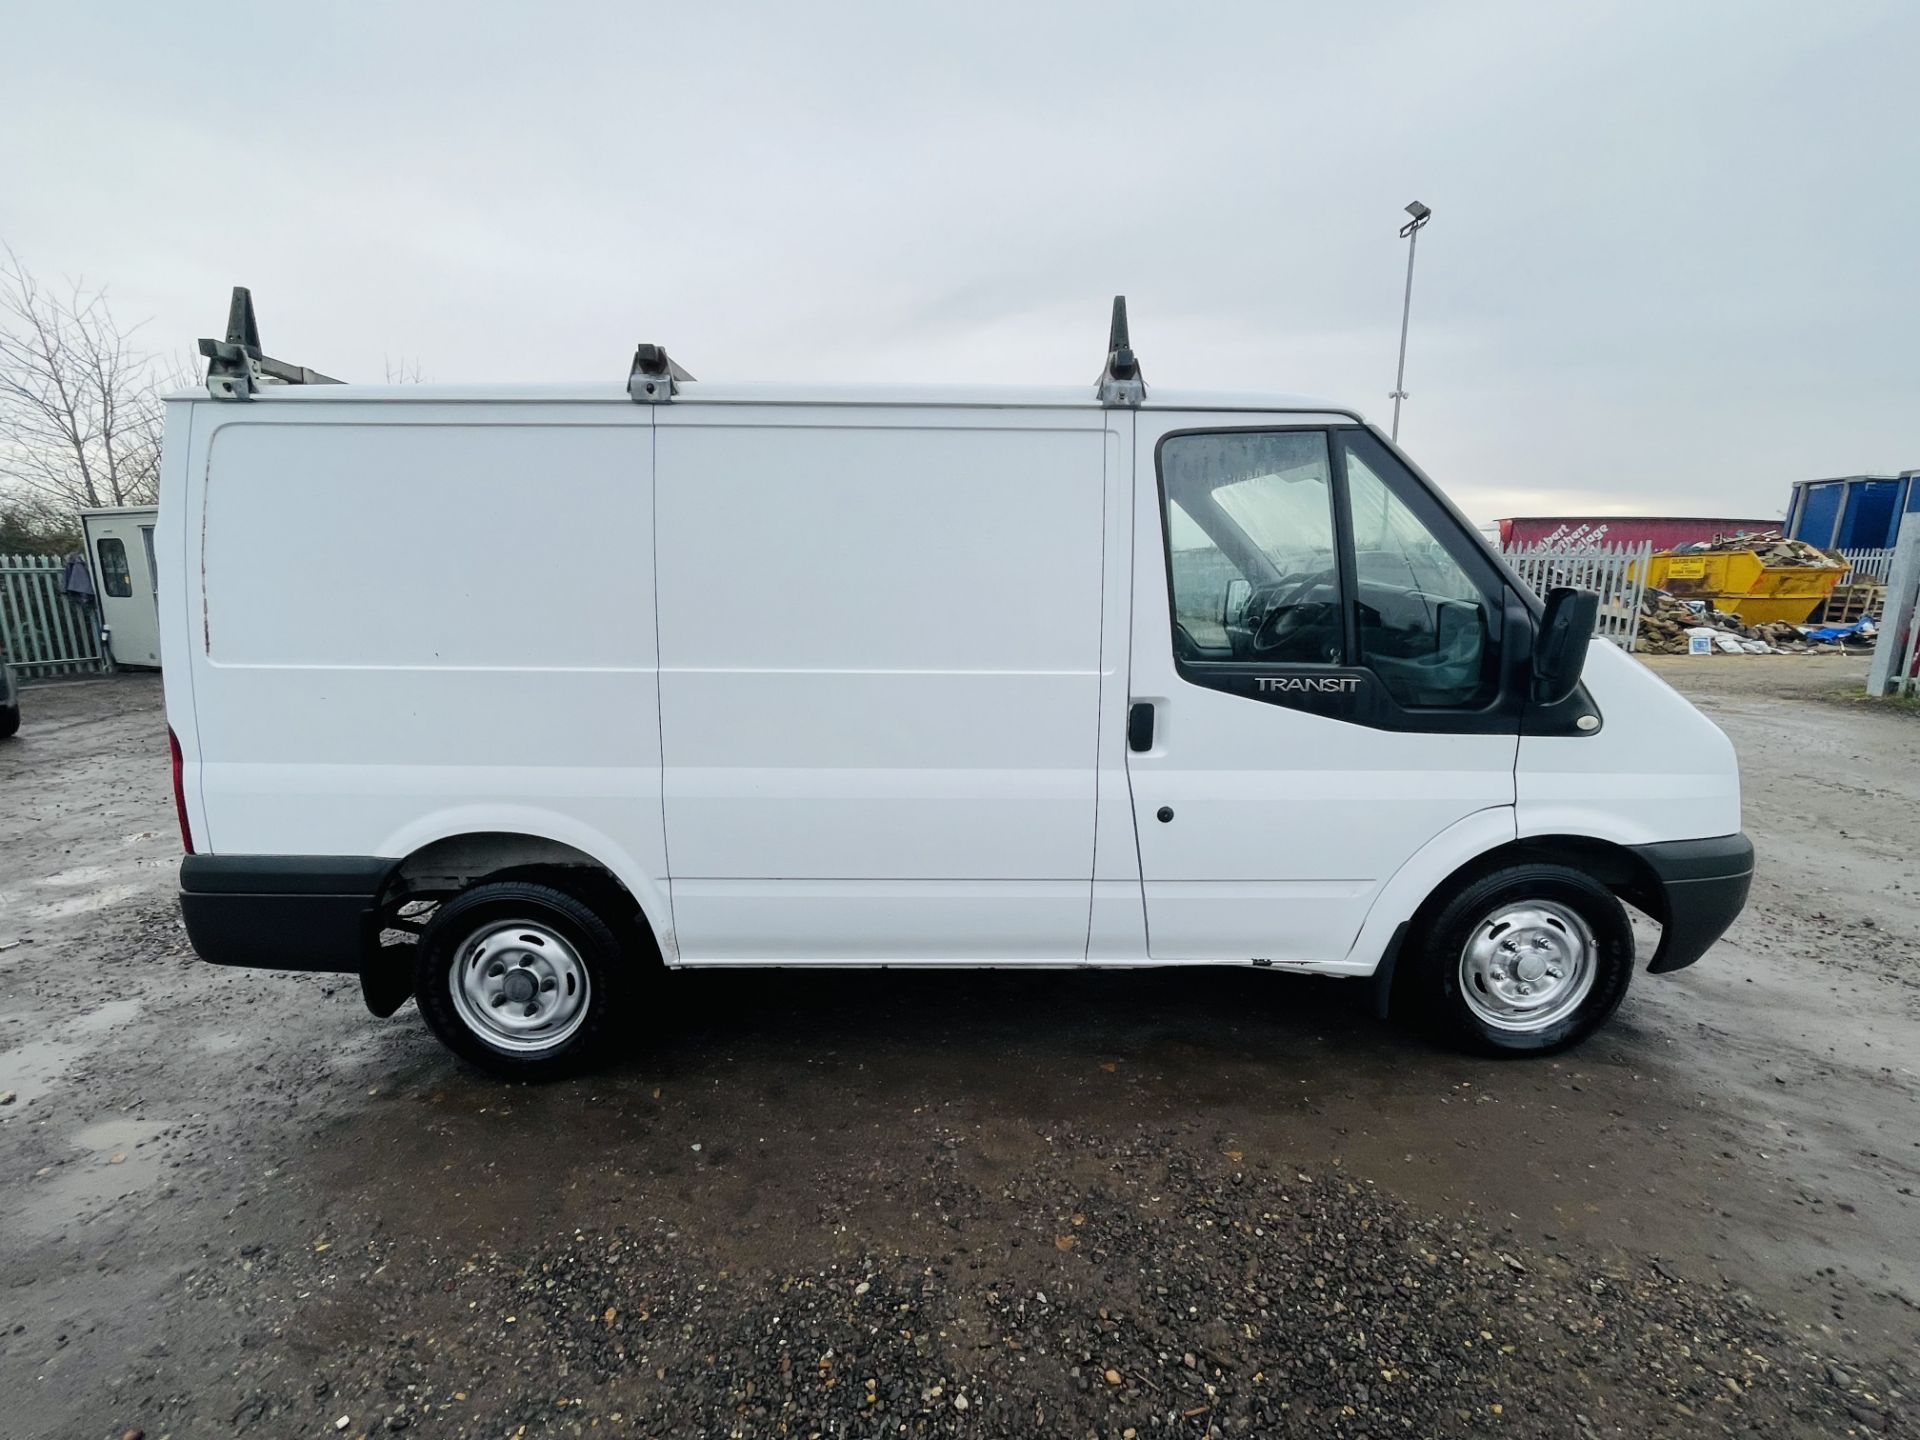 ** ON SALE ** Ford Transit 2.2 TDCI 100 FWD L1 H1 2013 '13 Reg' - Air con - No Vat Save 20% - Image 16 of 21